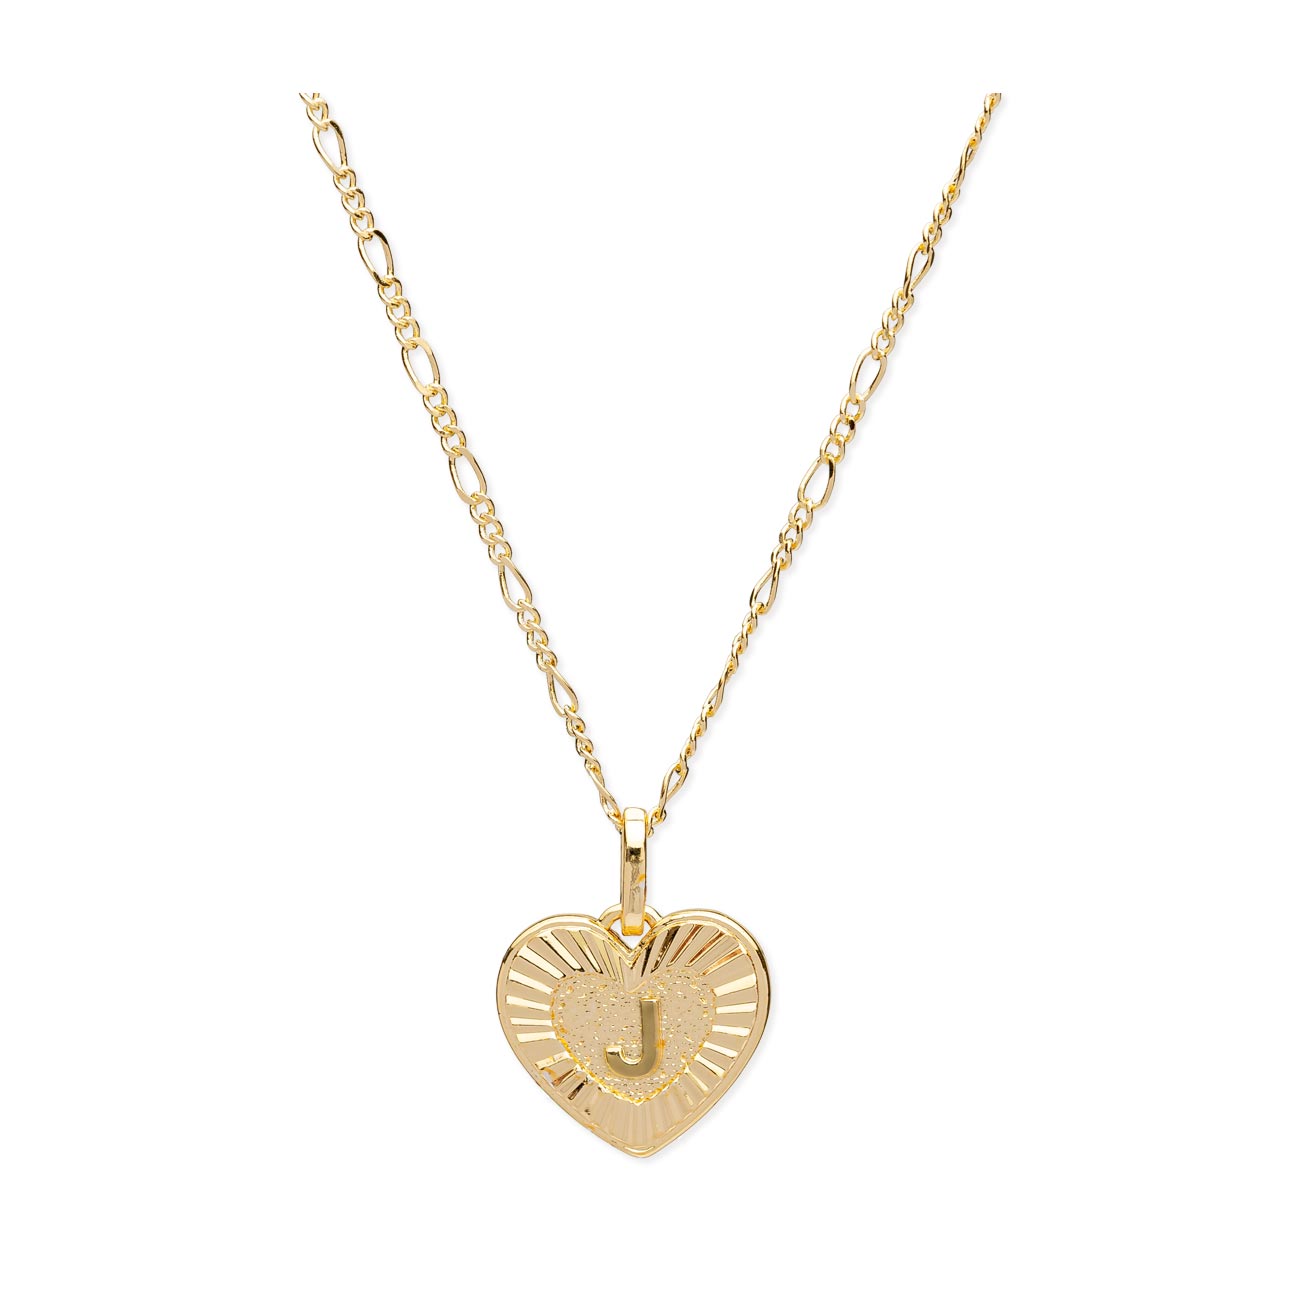 Delicate Heart Initial Necklace